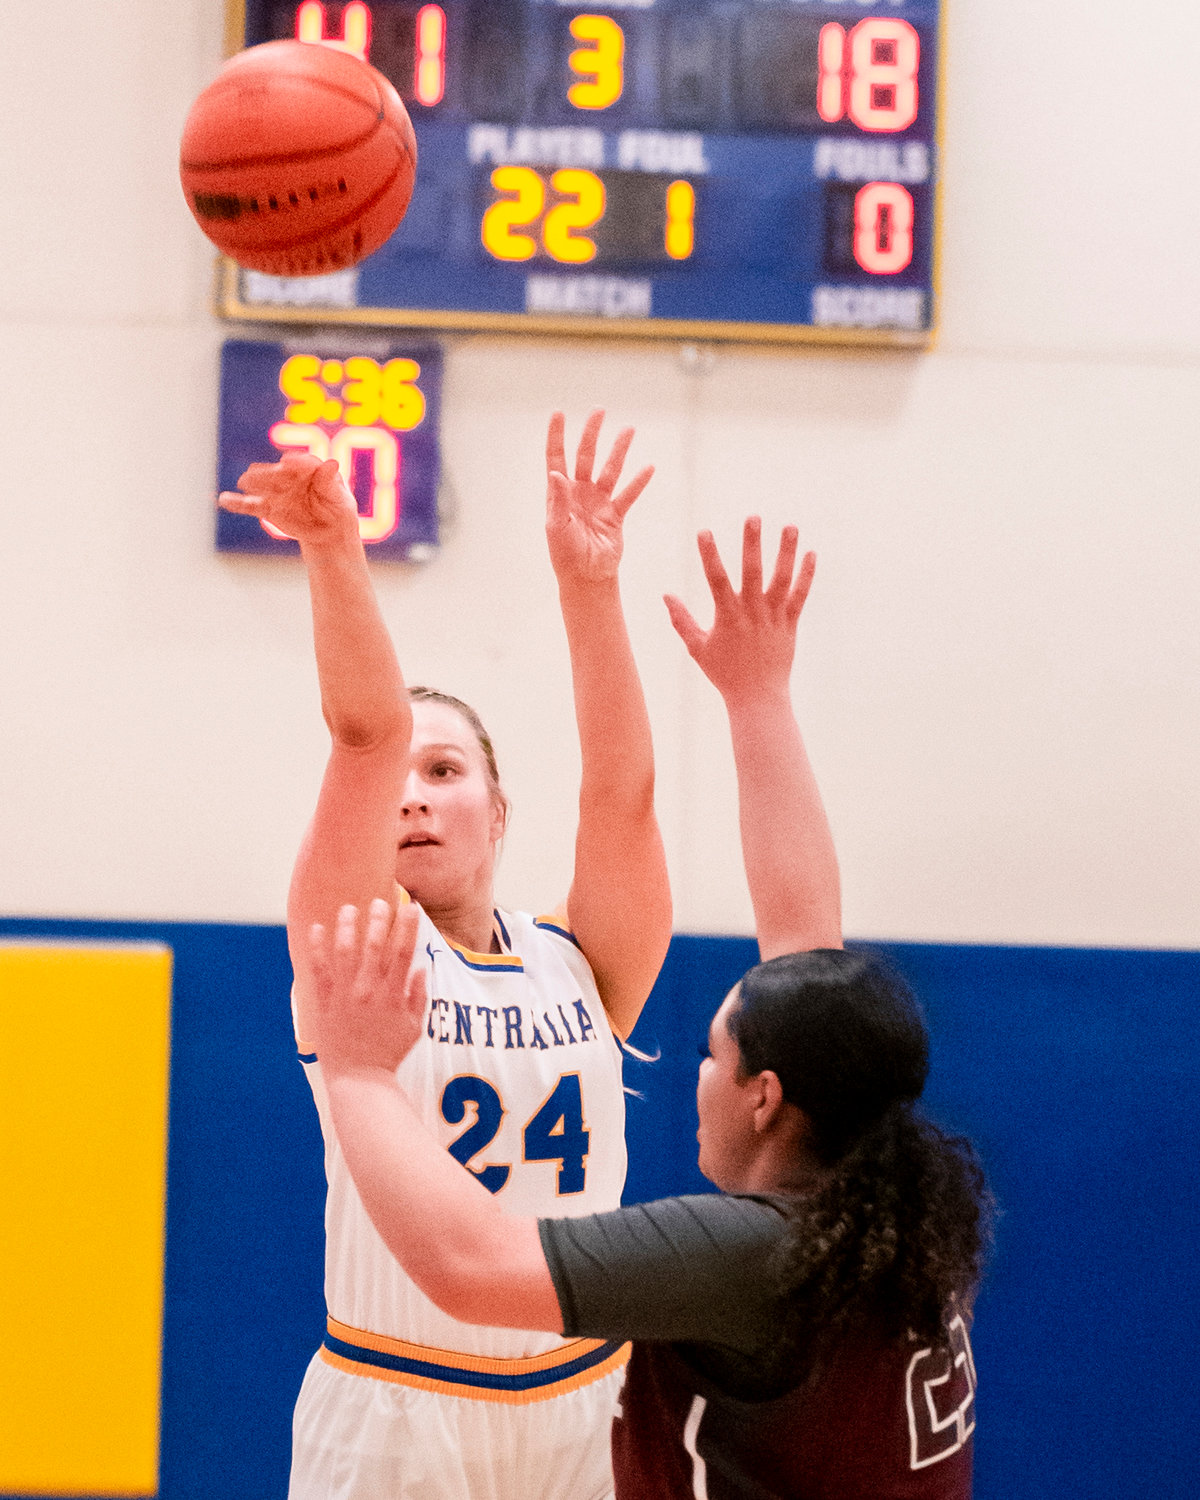 Centralia’s Paige Winter (24) puts up a shot Wednesday night during a game against Pierce College.